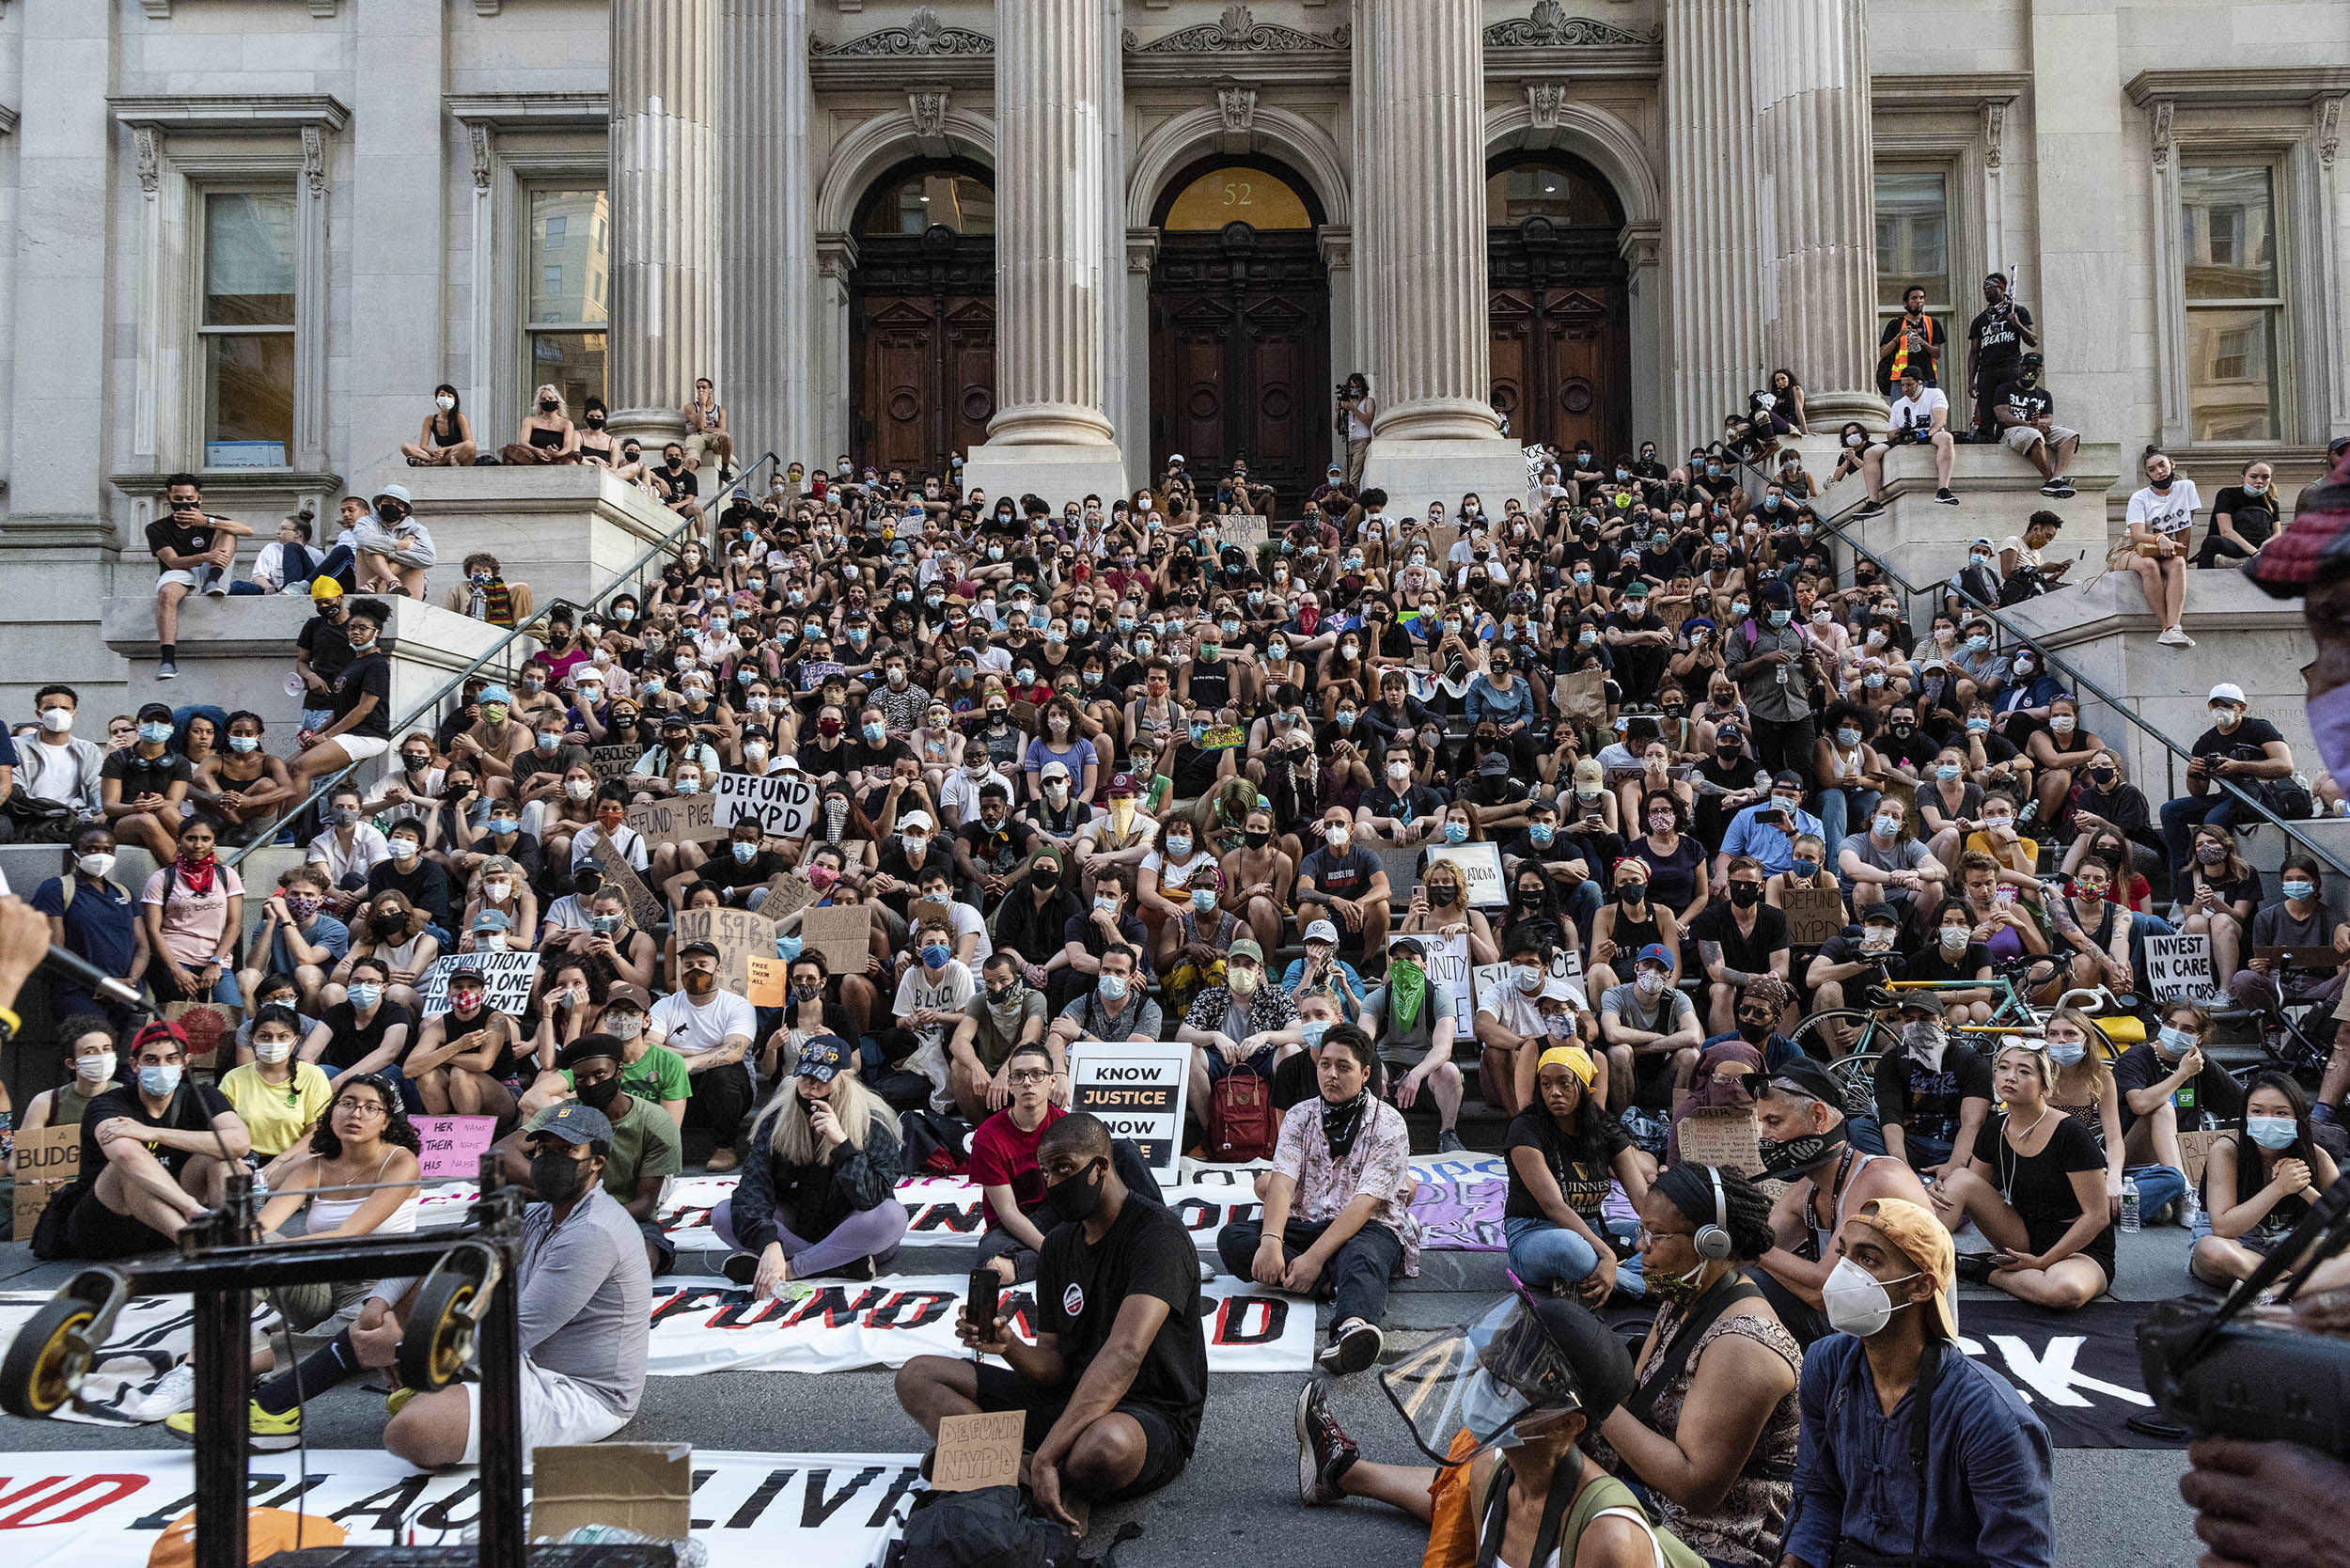 Here's the latest on the Black Lives Matter protests